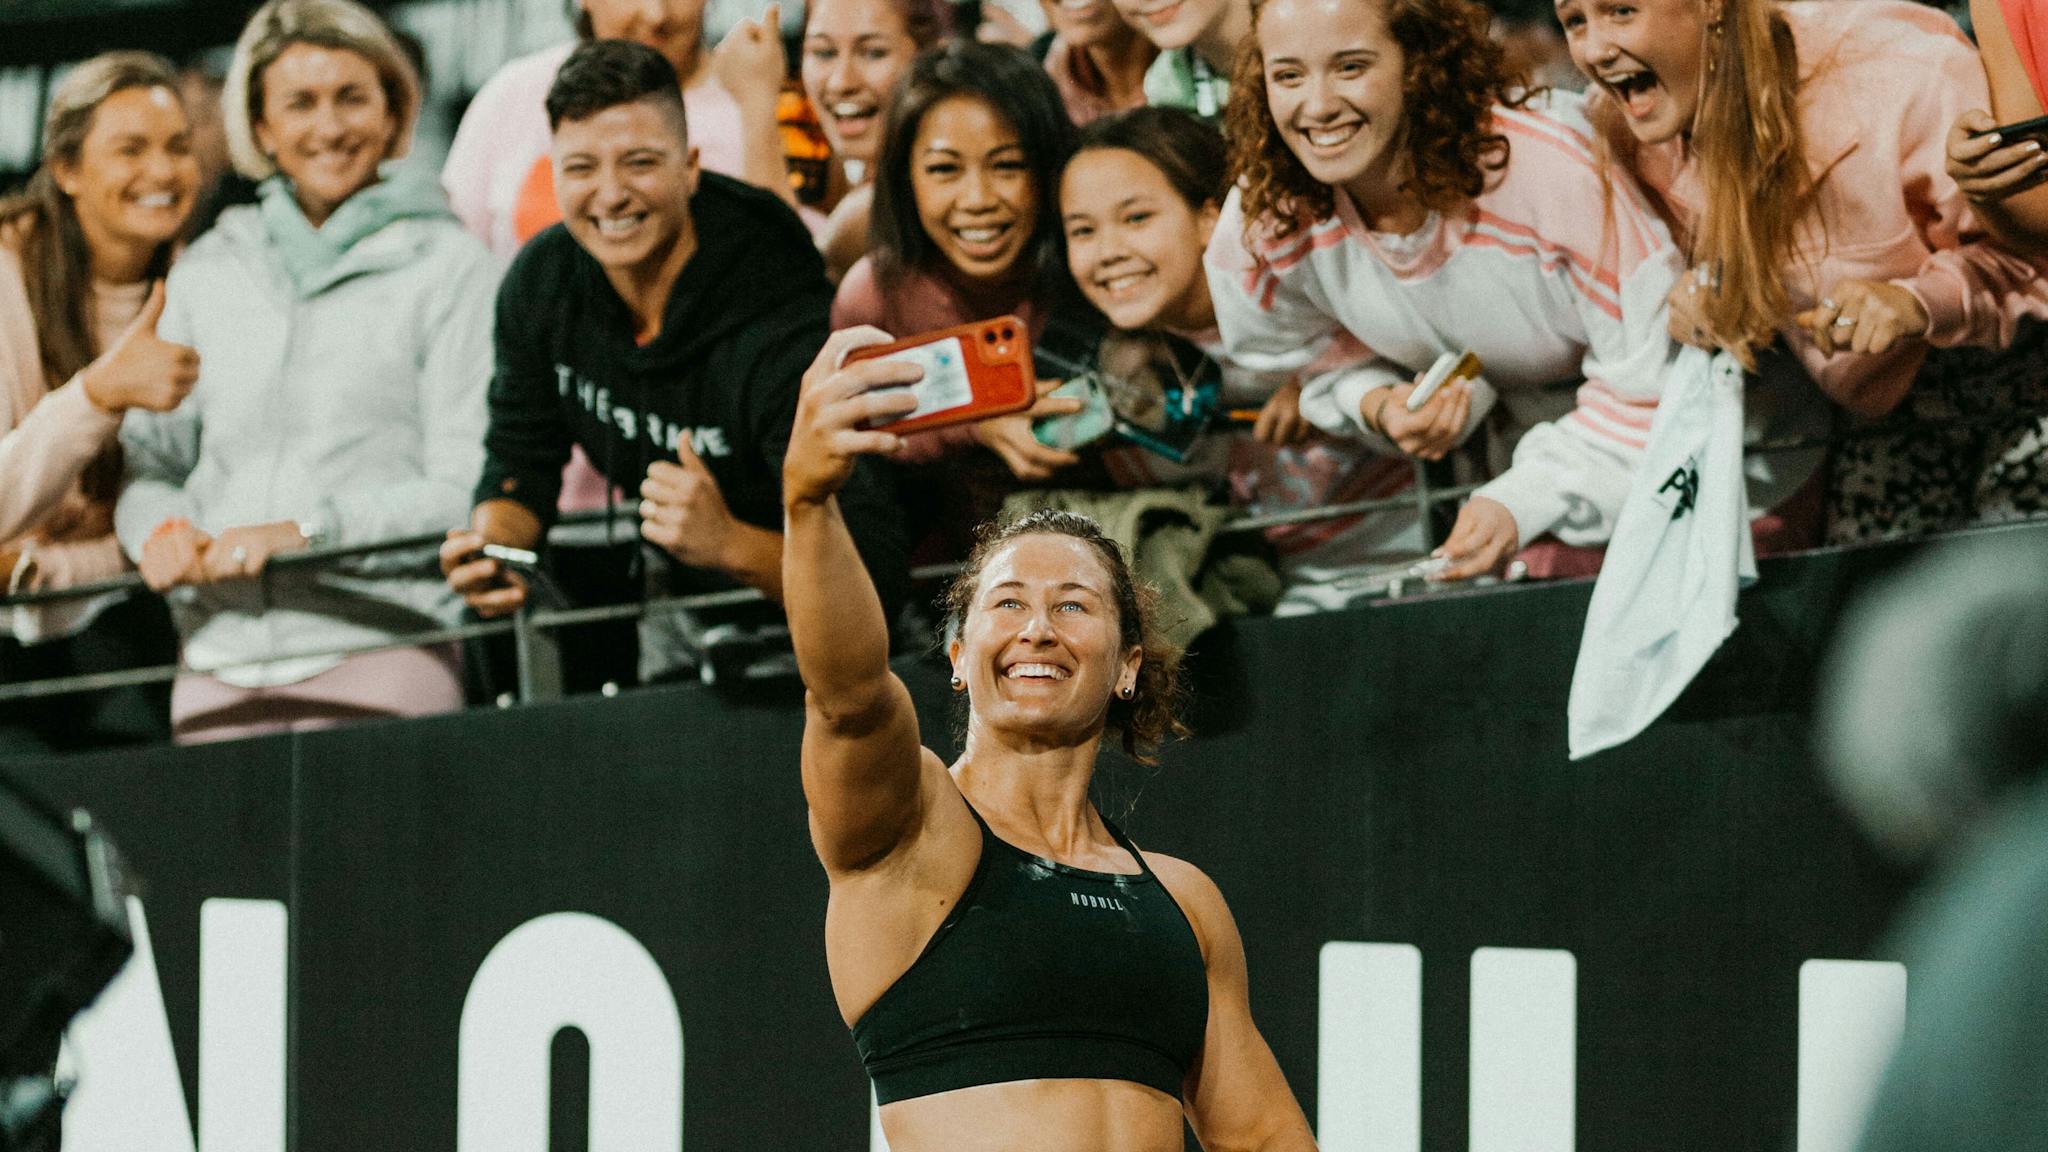 Tia-Clair Toomey gets a selfie with fans